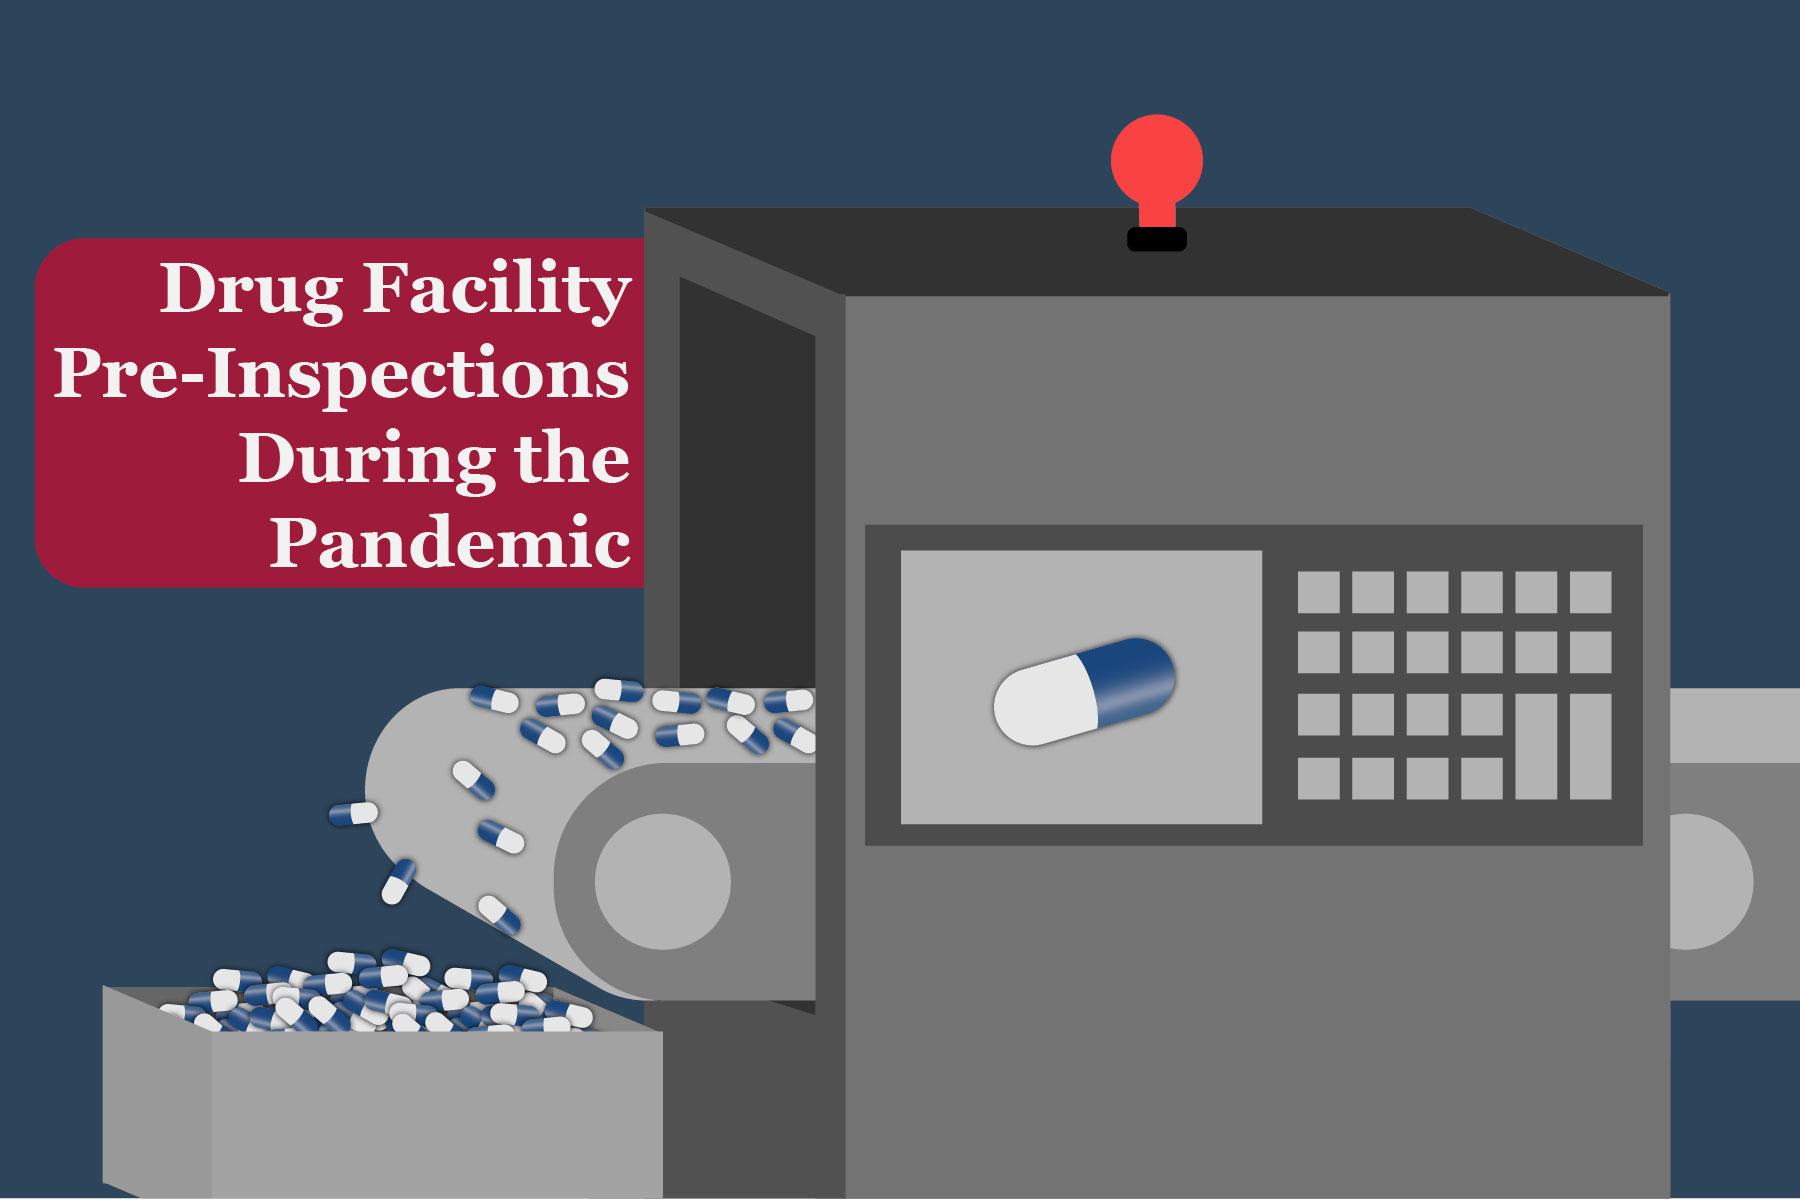 Drug Facility Pre-Inspections During the Pandemic